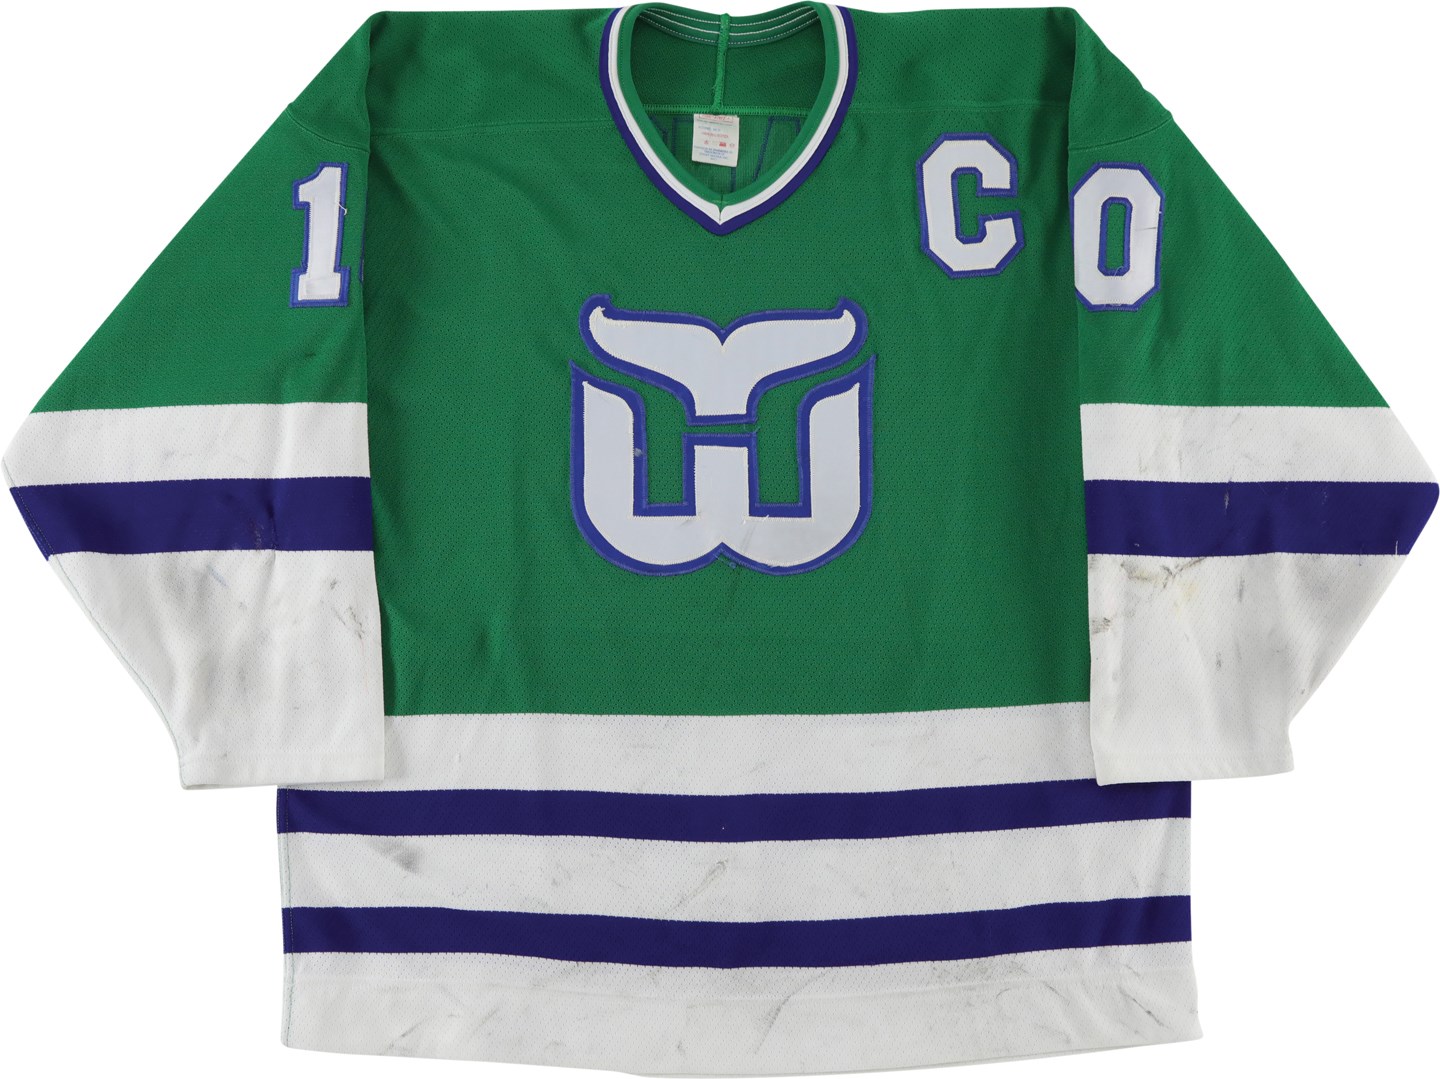 - 1988-89 Ron Francis Hartford Whalers Game Worn Jersey (Resolution Photo-Matched to 1989-90 Topps & O-Pee-Chee Cards)